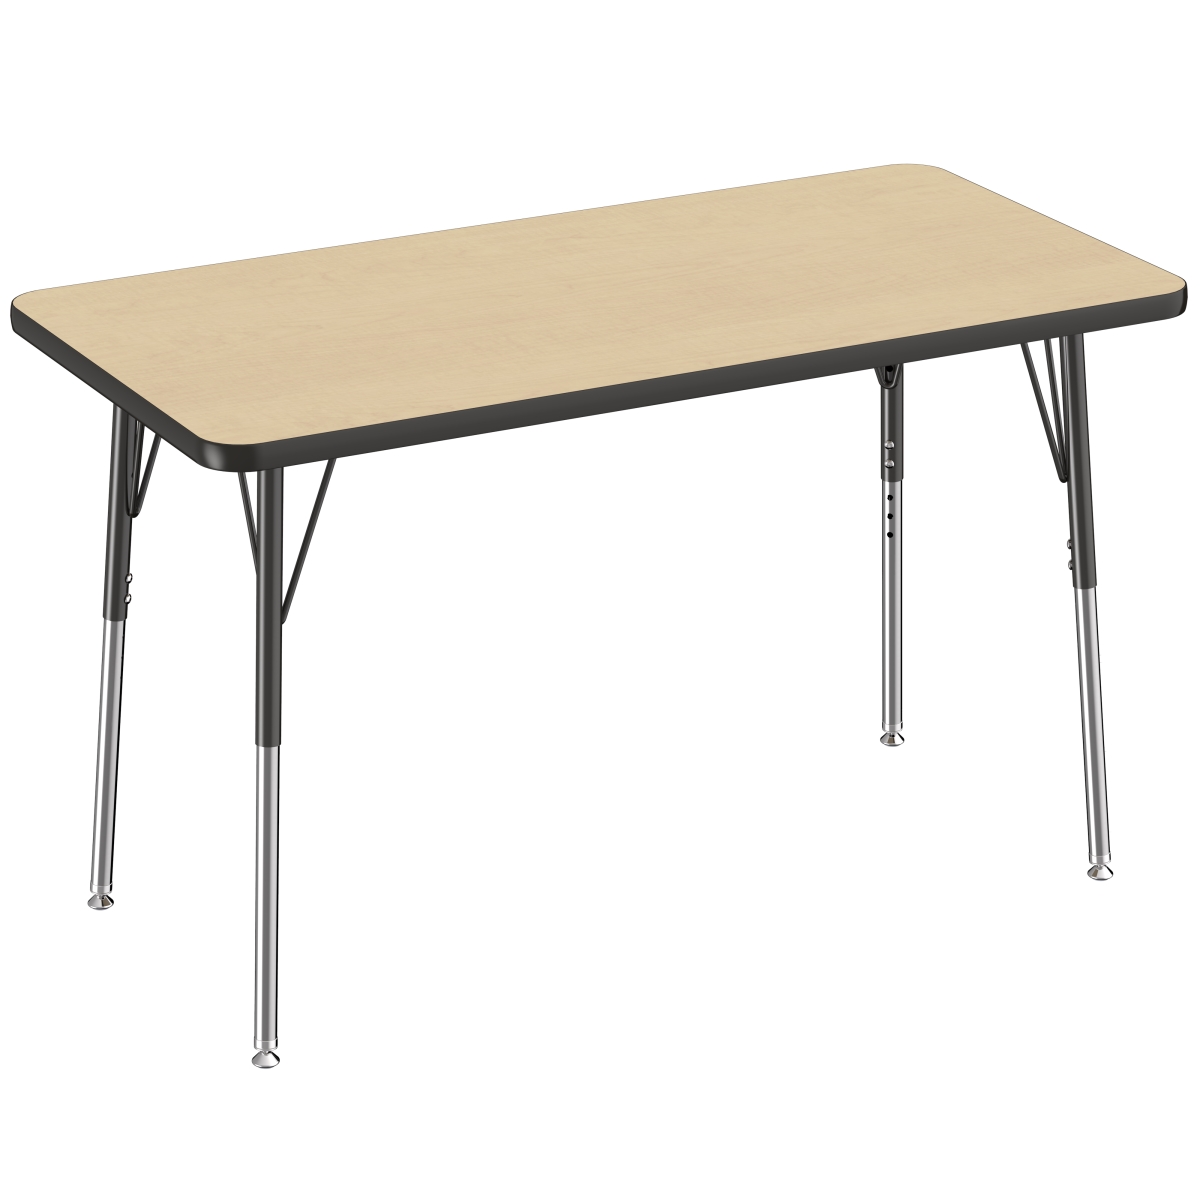 10007-mpbk 24 X 48 In. Rectangle T-mold Adjustable Activity Table With Standard Swivel - Maple & Black